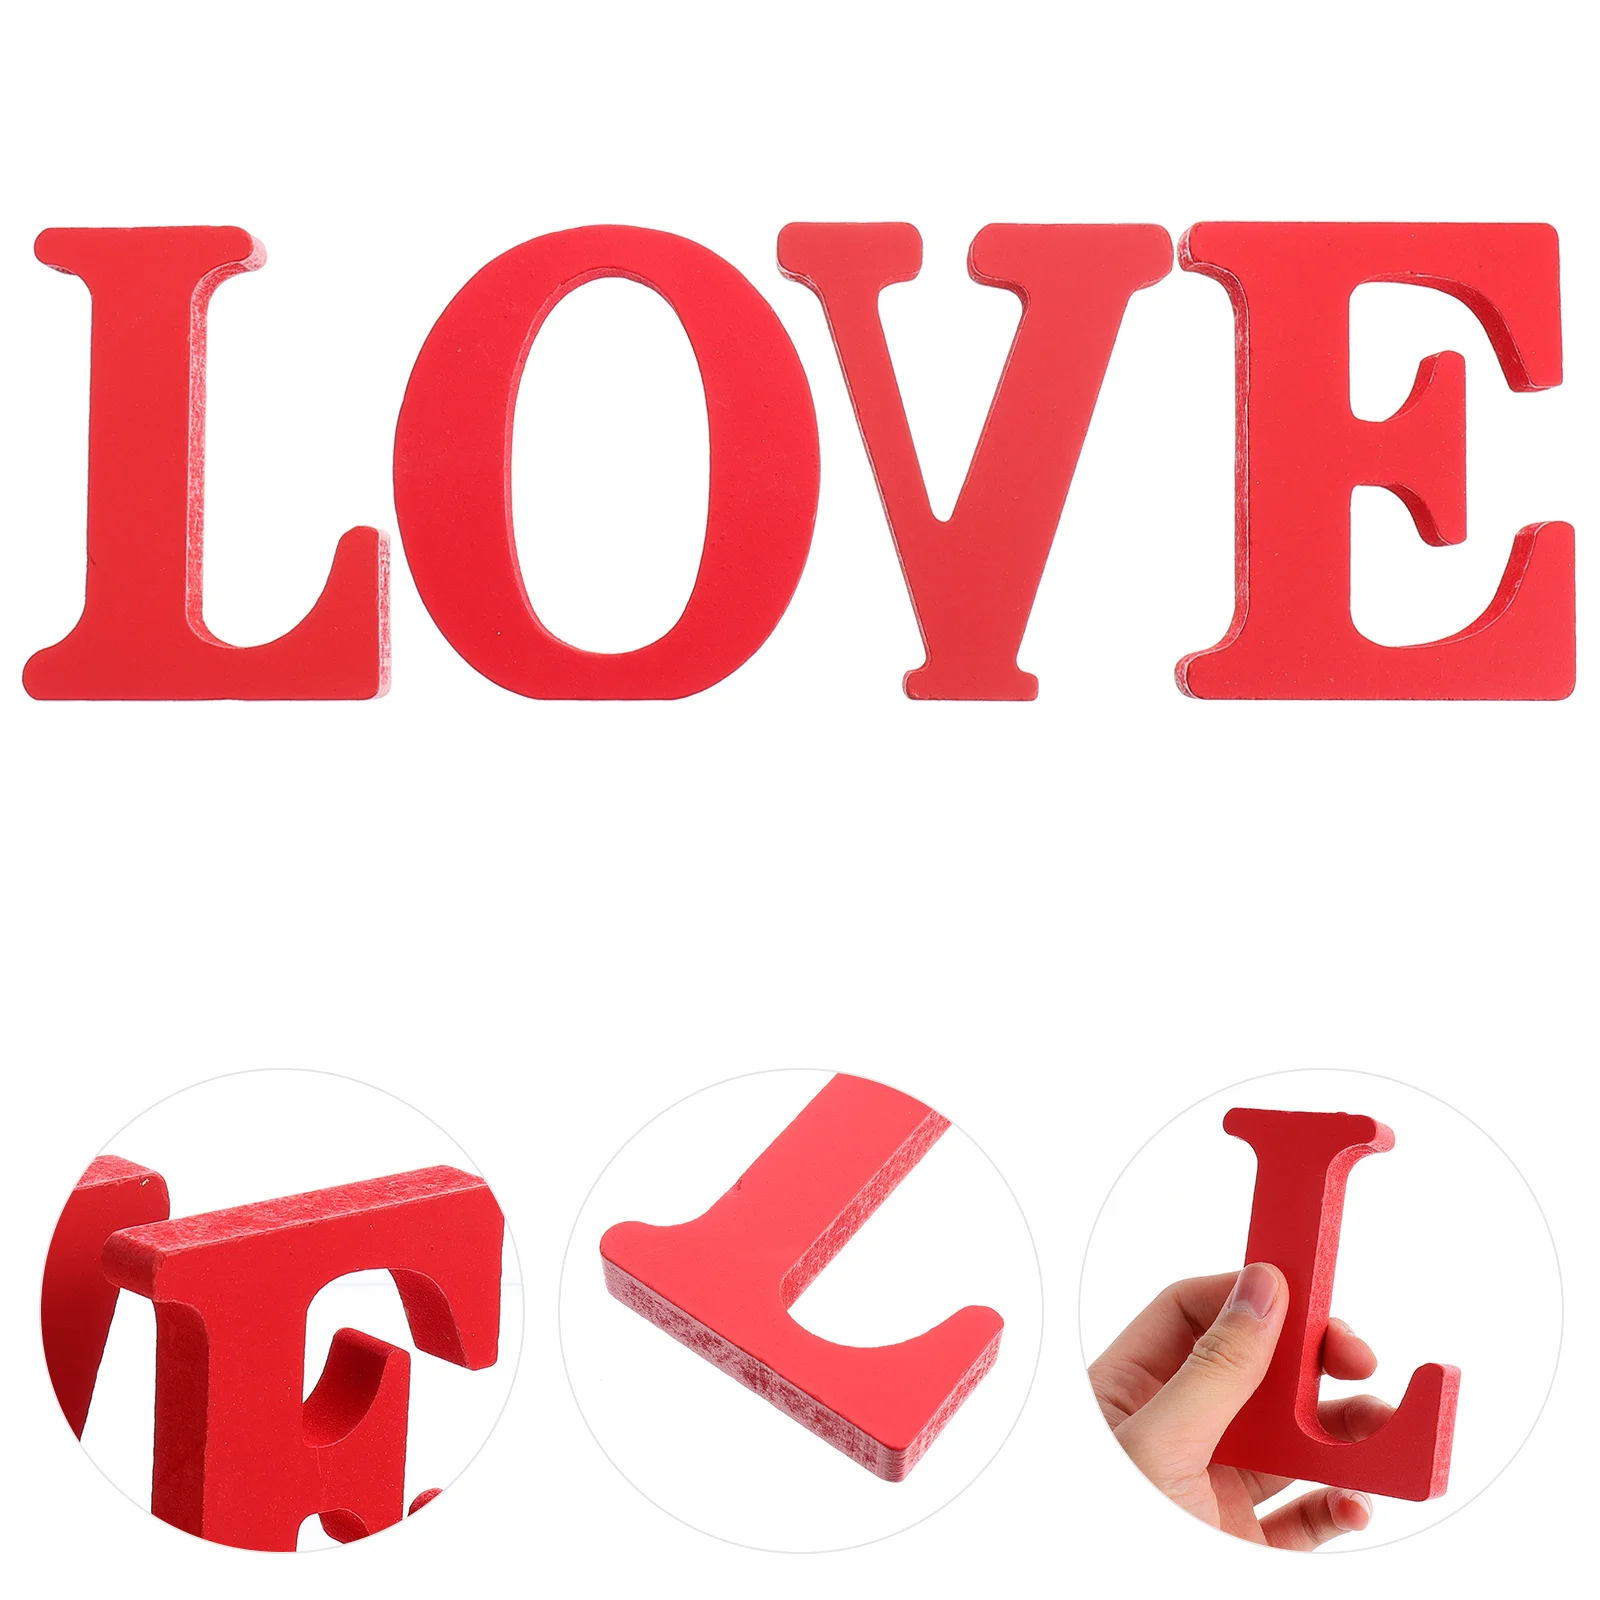 

Sign Love Wood Letters Wooden Decor Freestanding Desk Out Cut Word Block Table Letter Wall Signs Cutout Standing Decorative Red